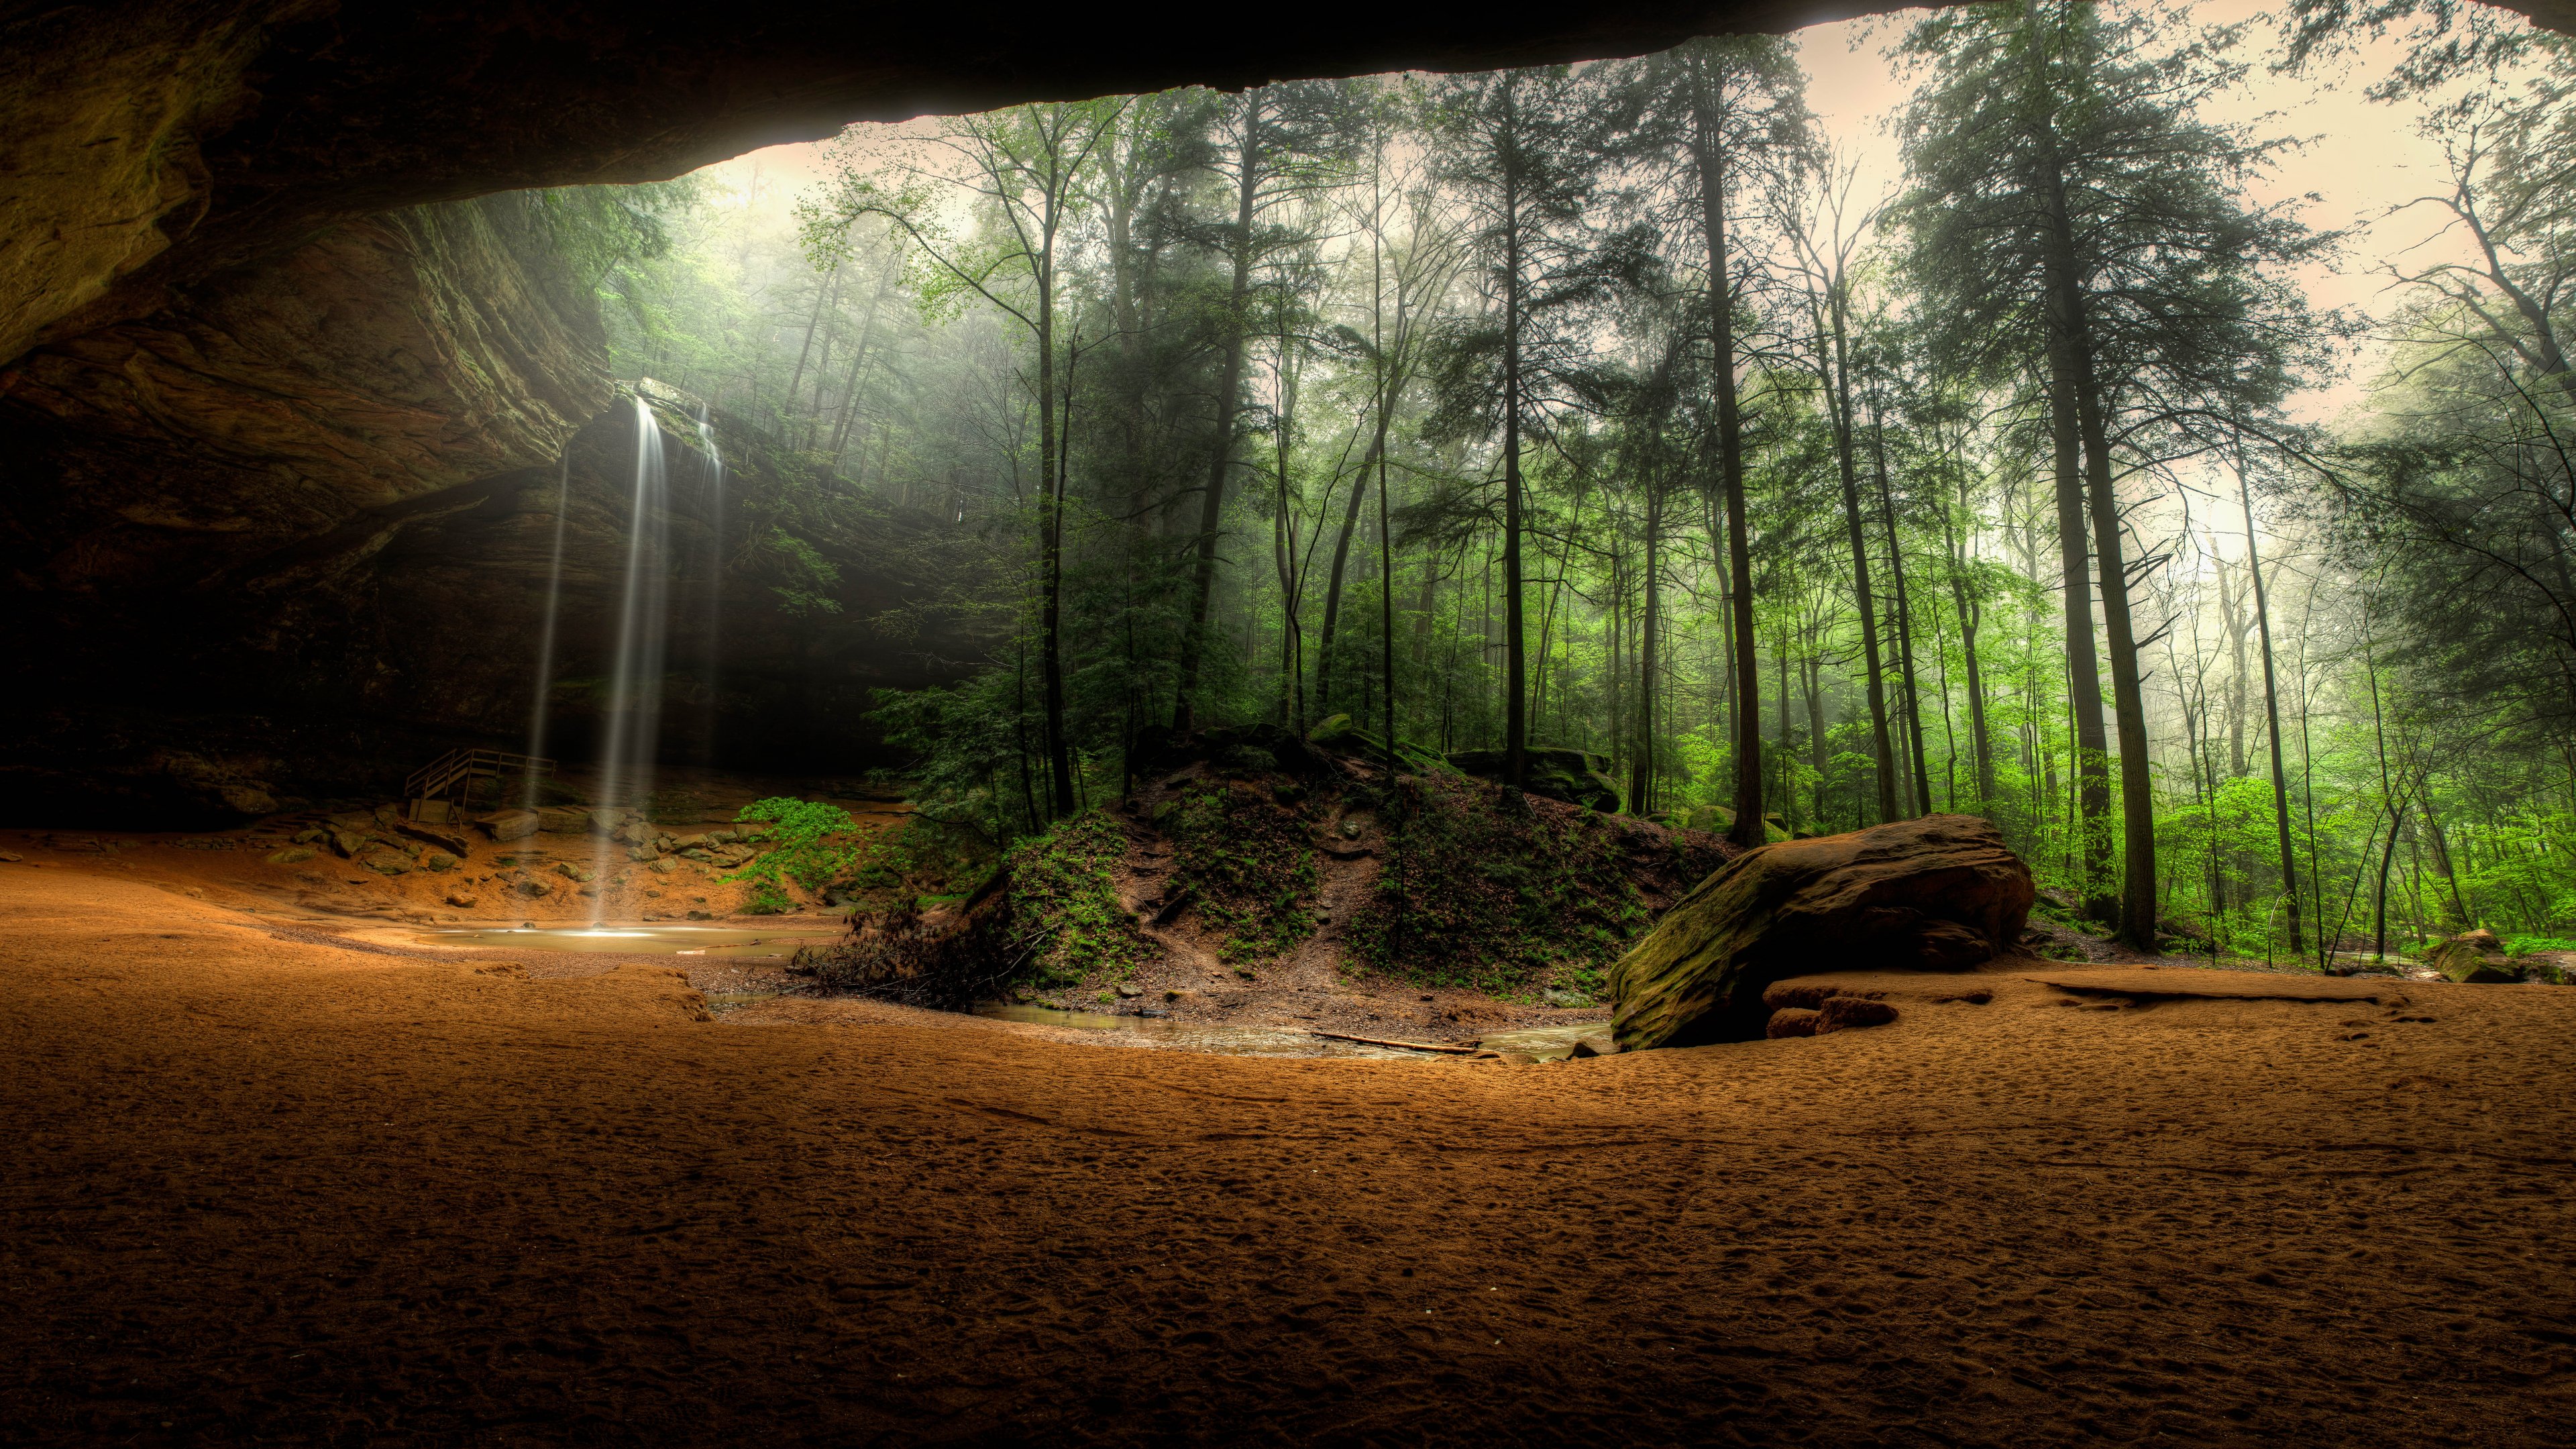 General 3840x2160 Ohio cave forest